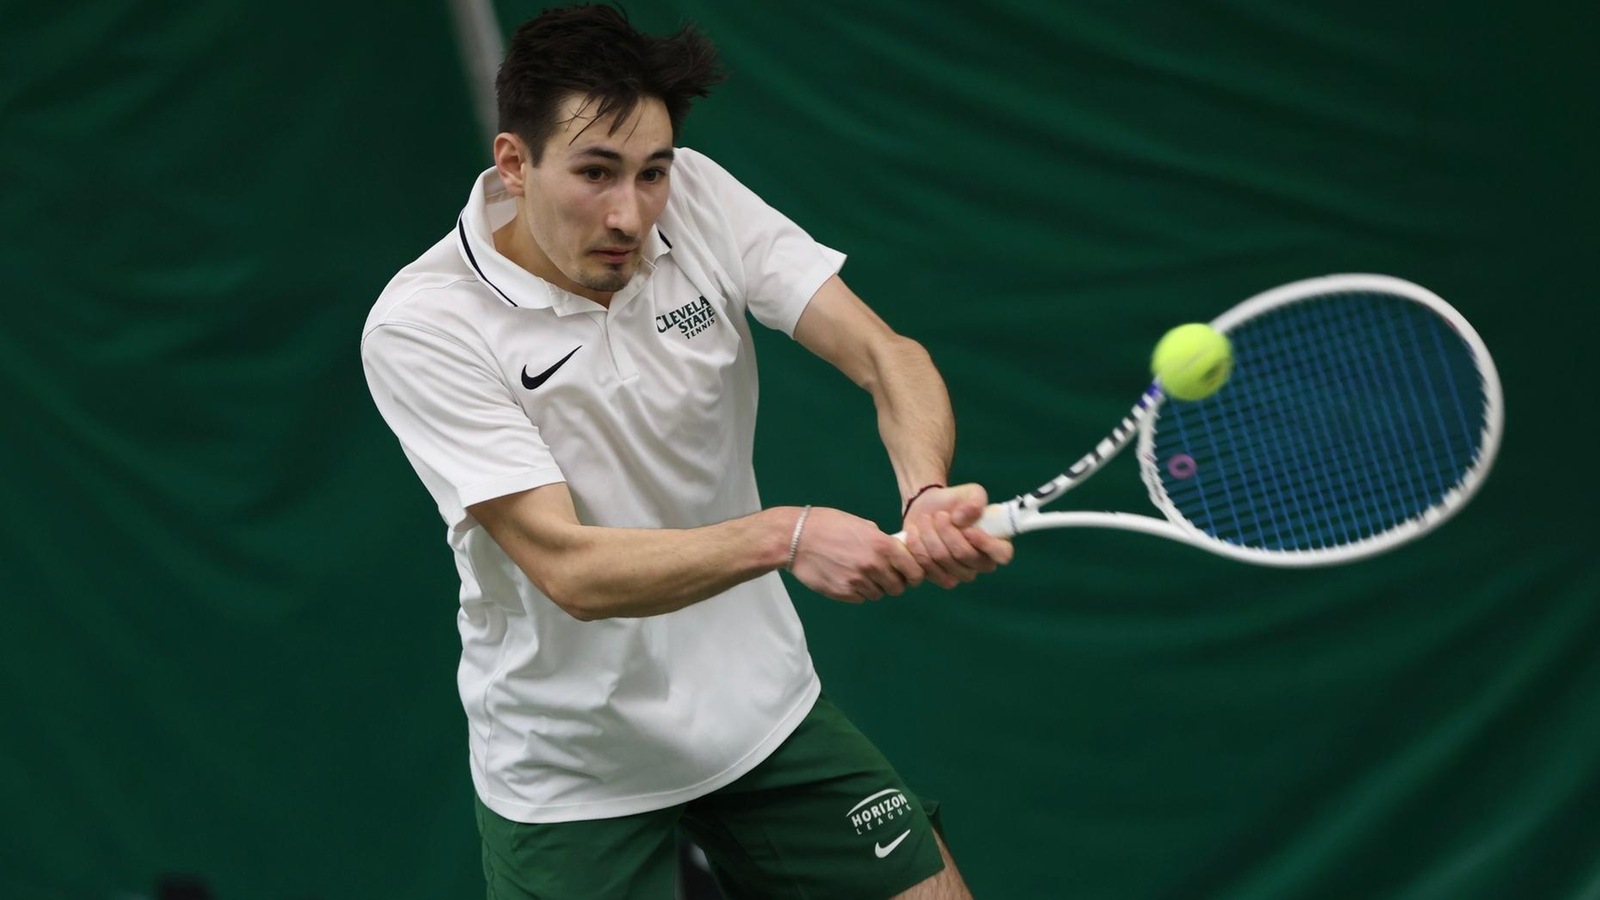 Cleveland State Men’s Tennis Continues Spring Slate By Hosting Butler & Duquesne